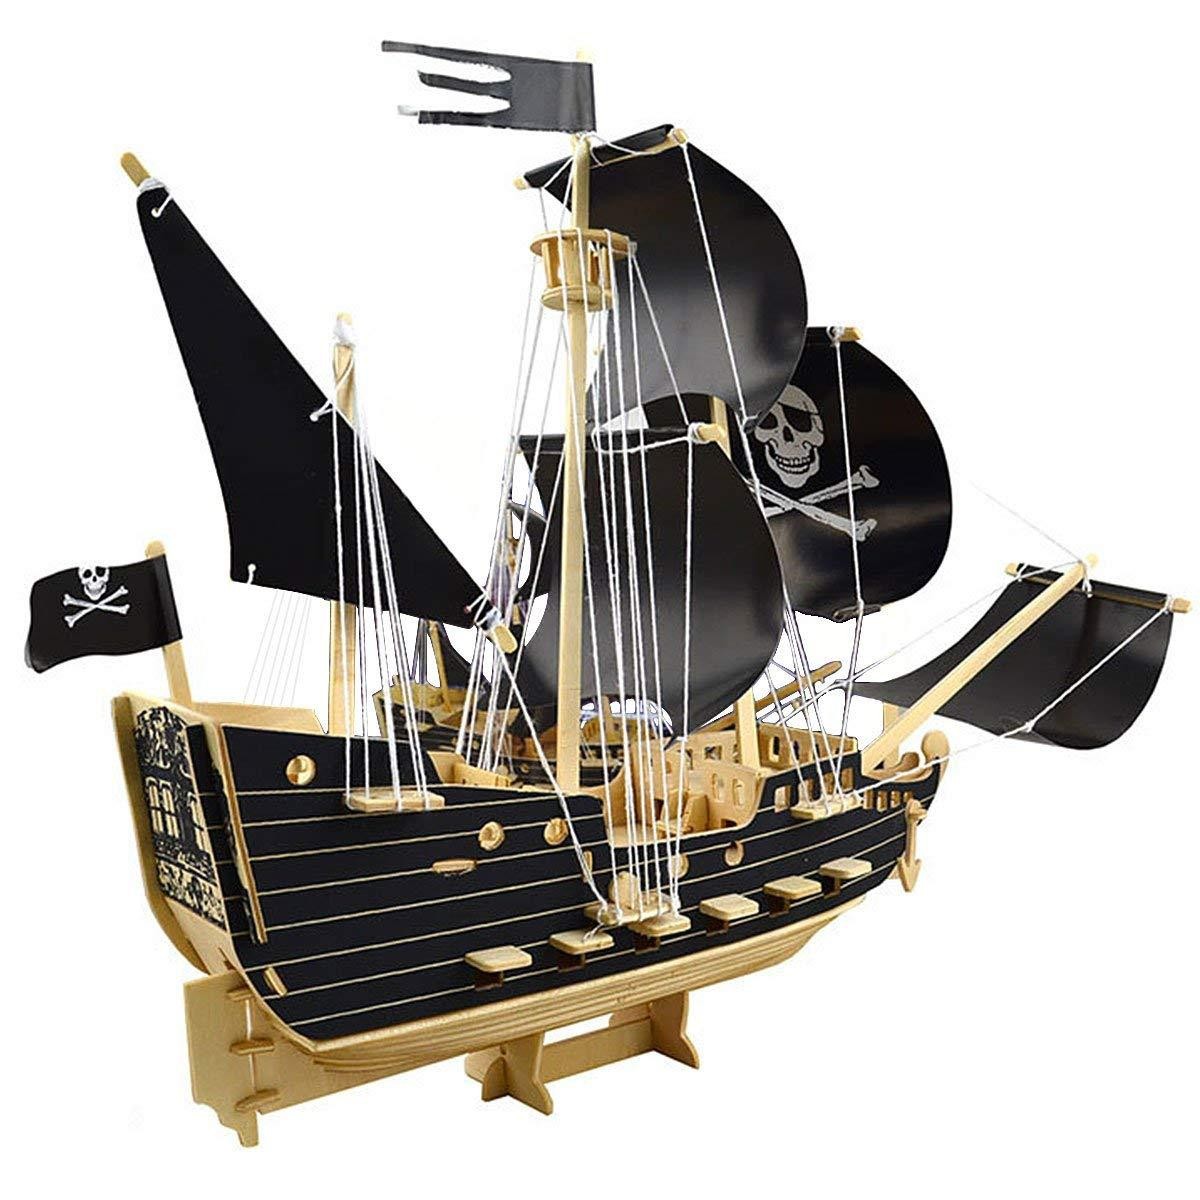 Papercraft Boat Pirate Ship Wooden Models 3d Wooden Sailing Ships Models Puzzle